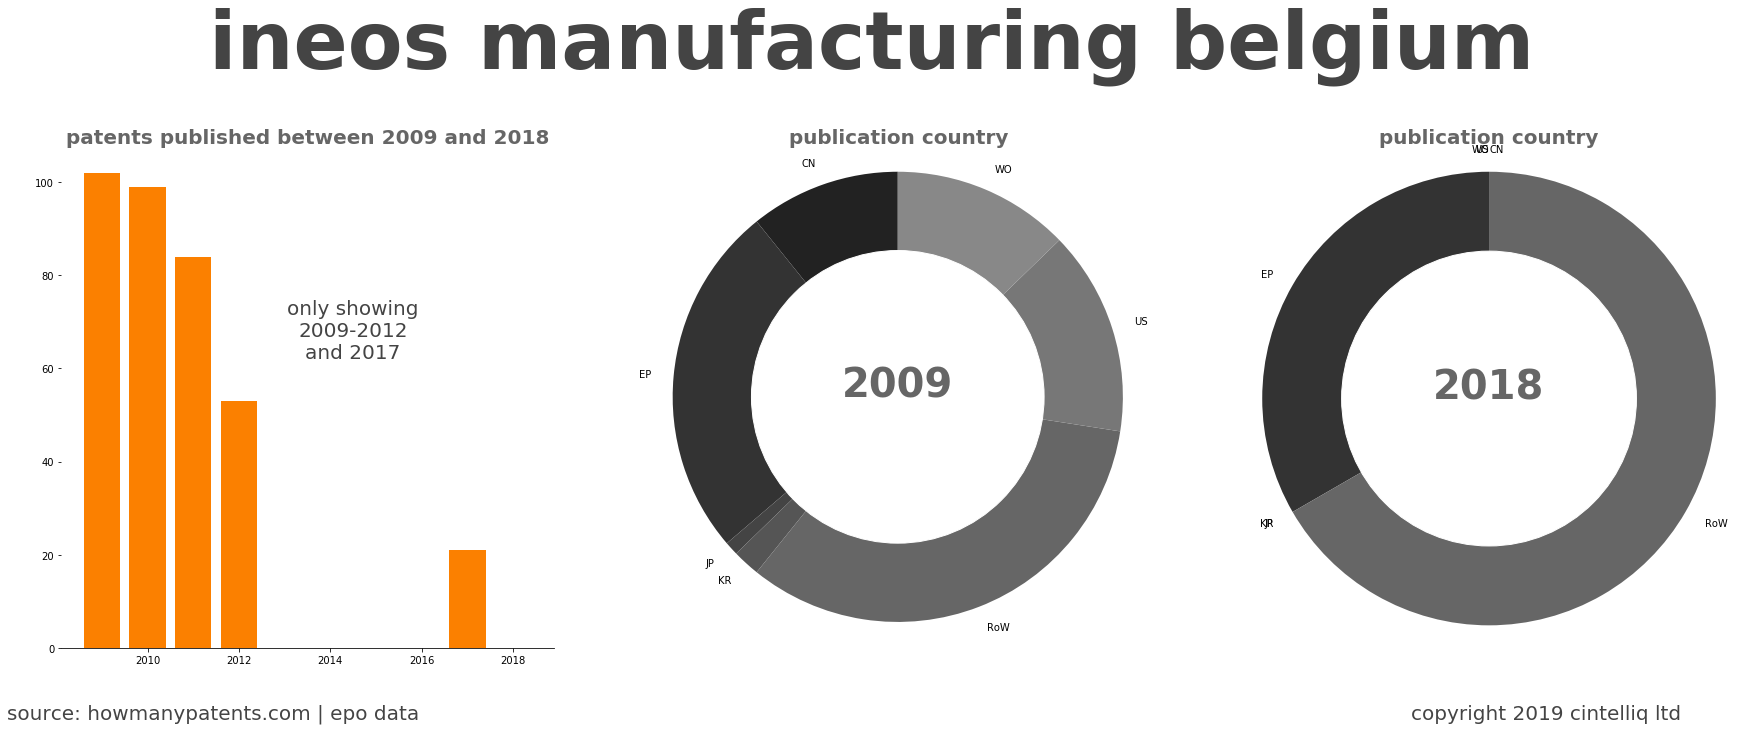 summary of patents for Ineos Manufacturing Belgium